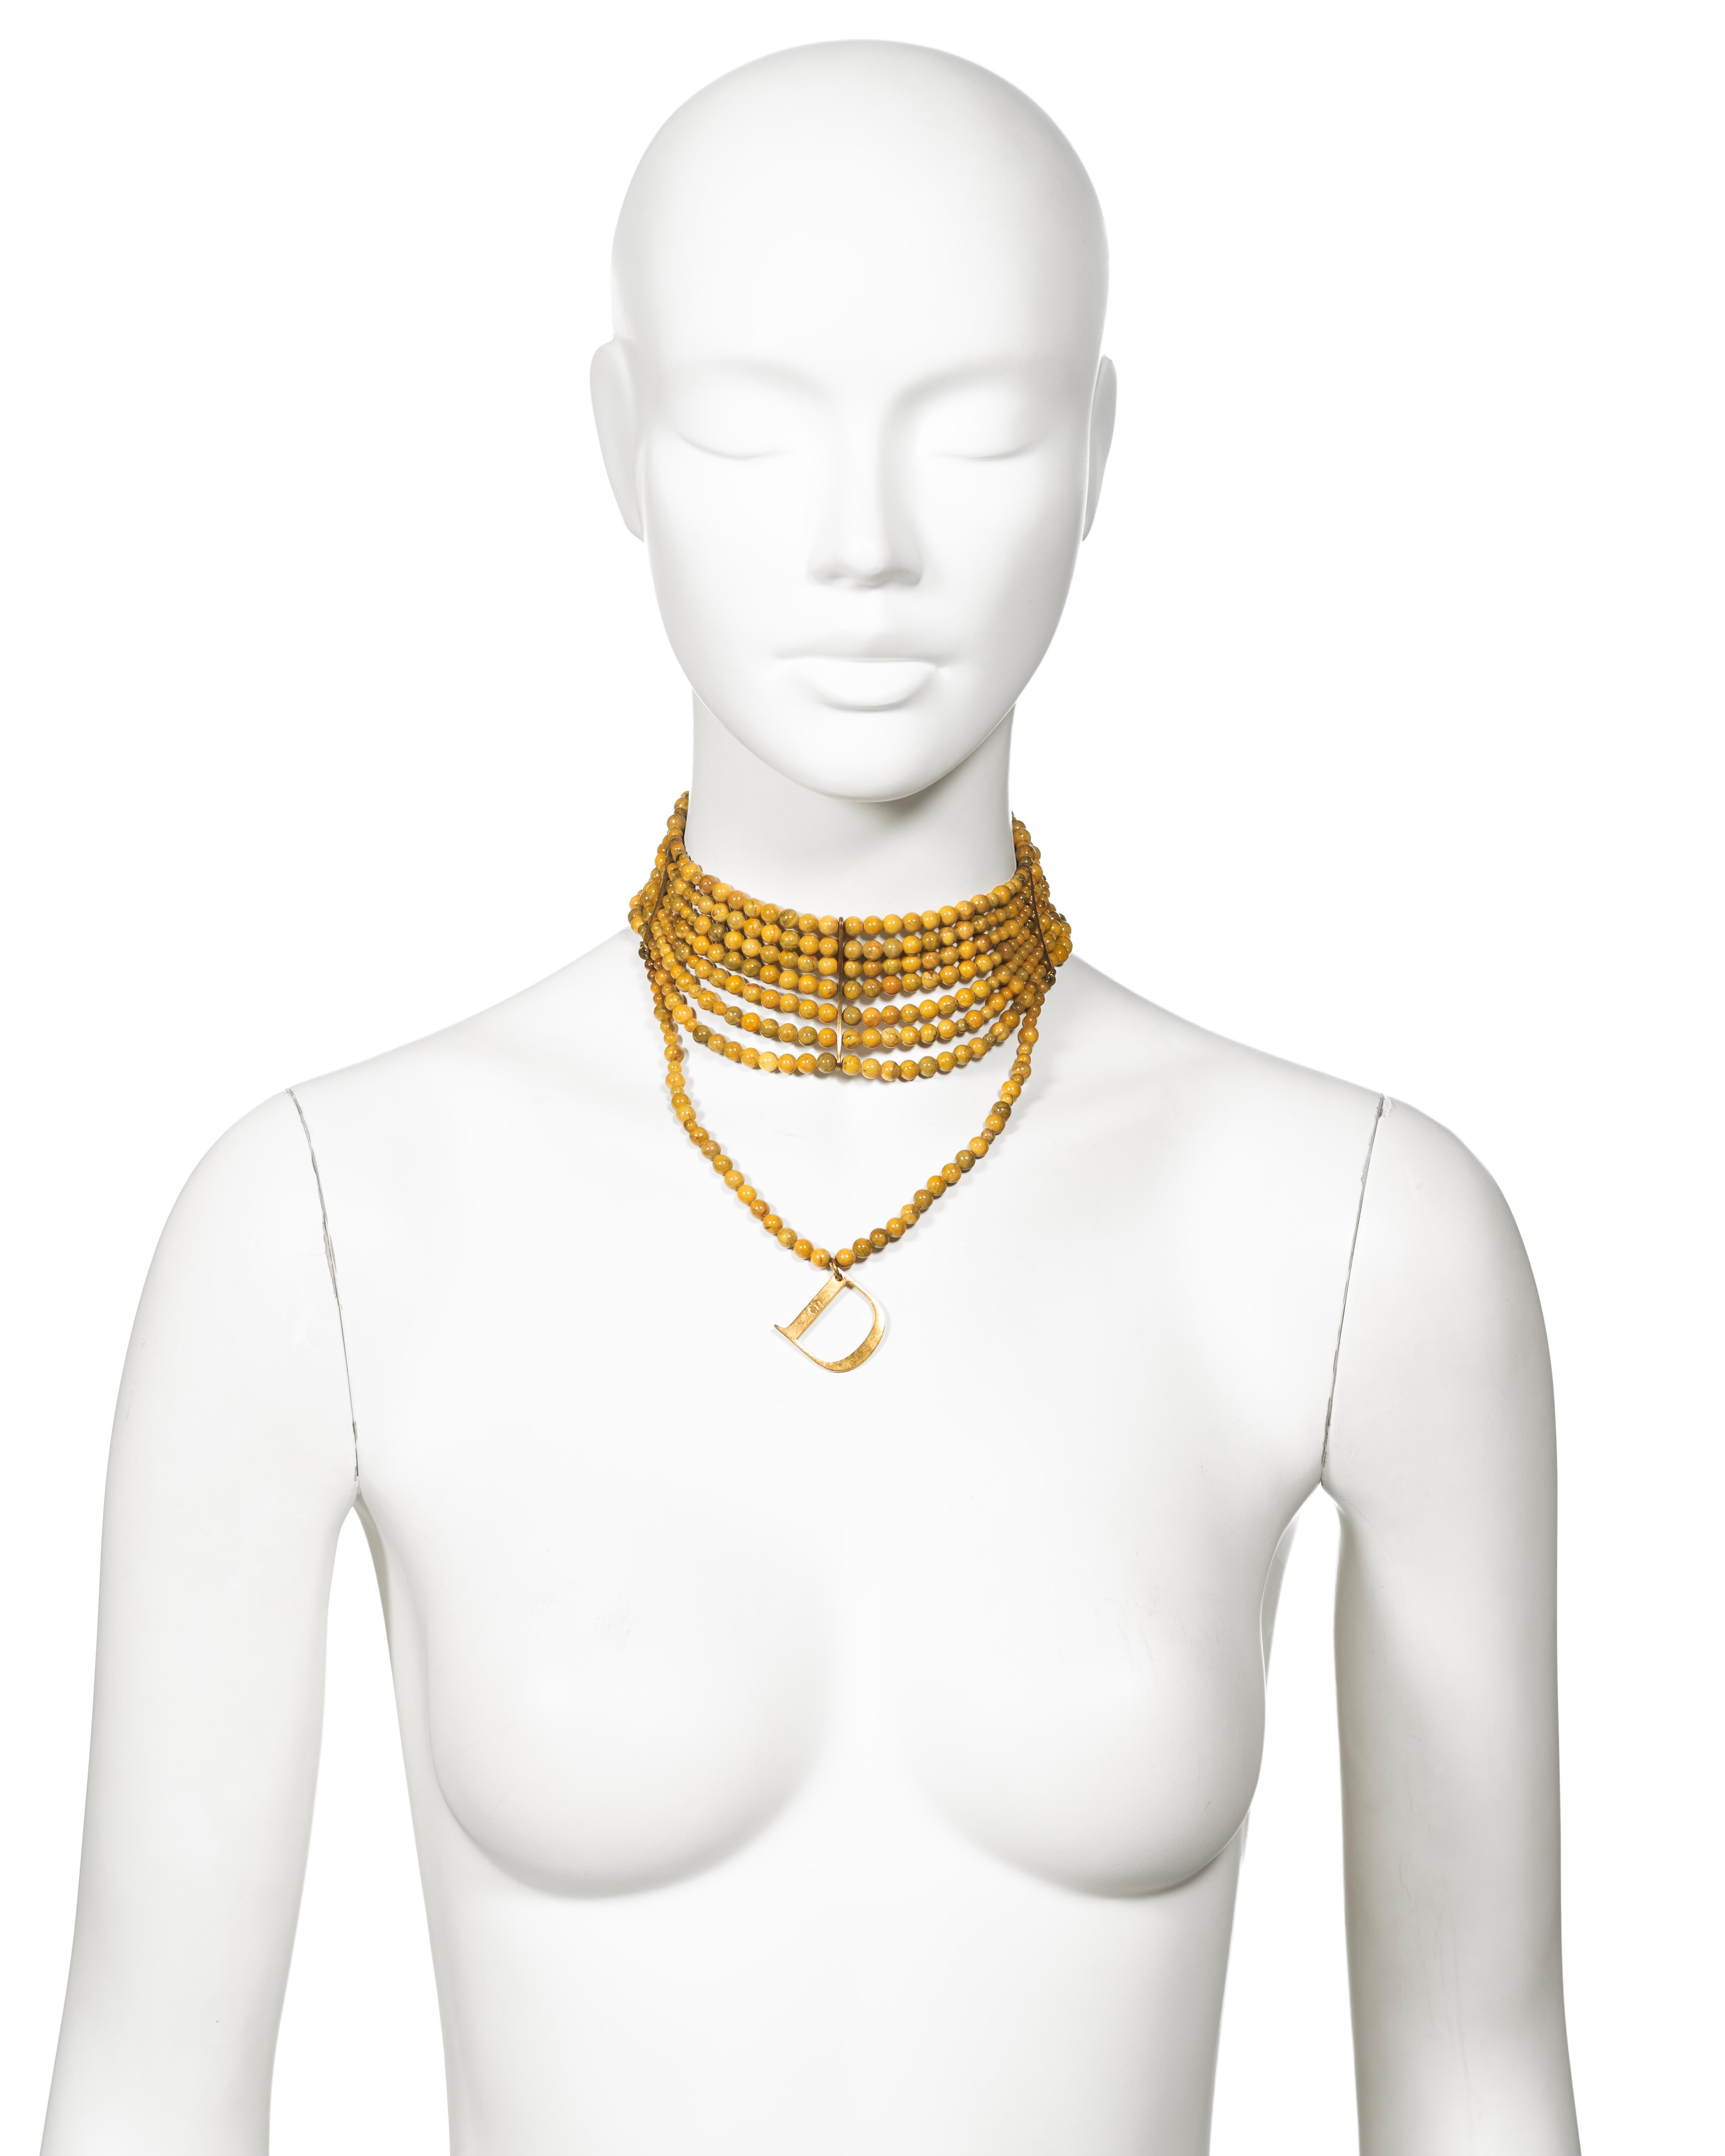 Christian Dior by John Galliano Marbled Glass Bead Choker Necklace, c. 1998 In Good Condition For Sale In London, GB